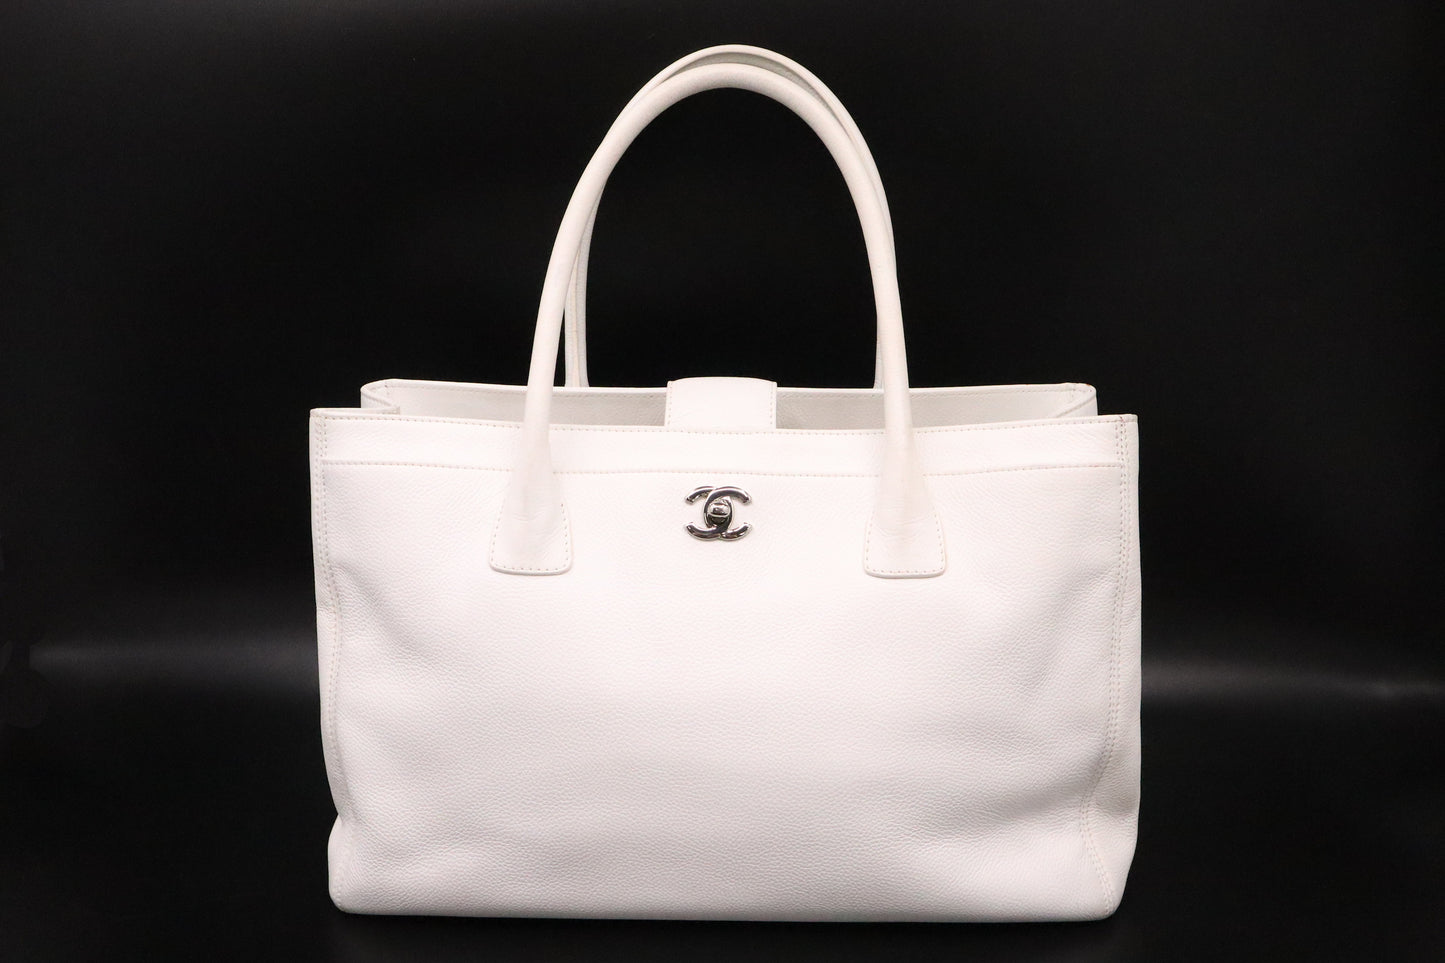 Chanel Executive Tote Bag in White Leather